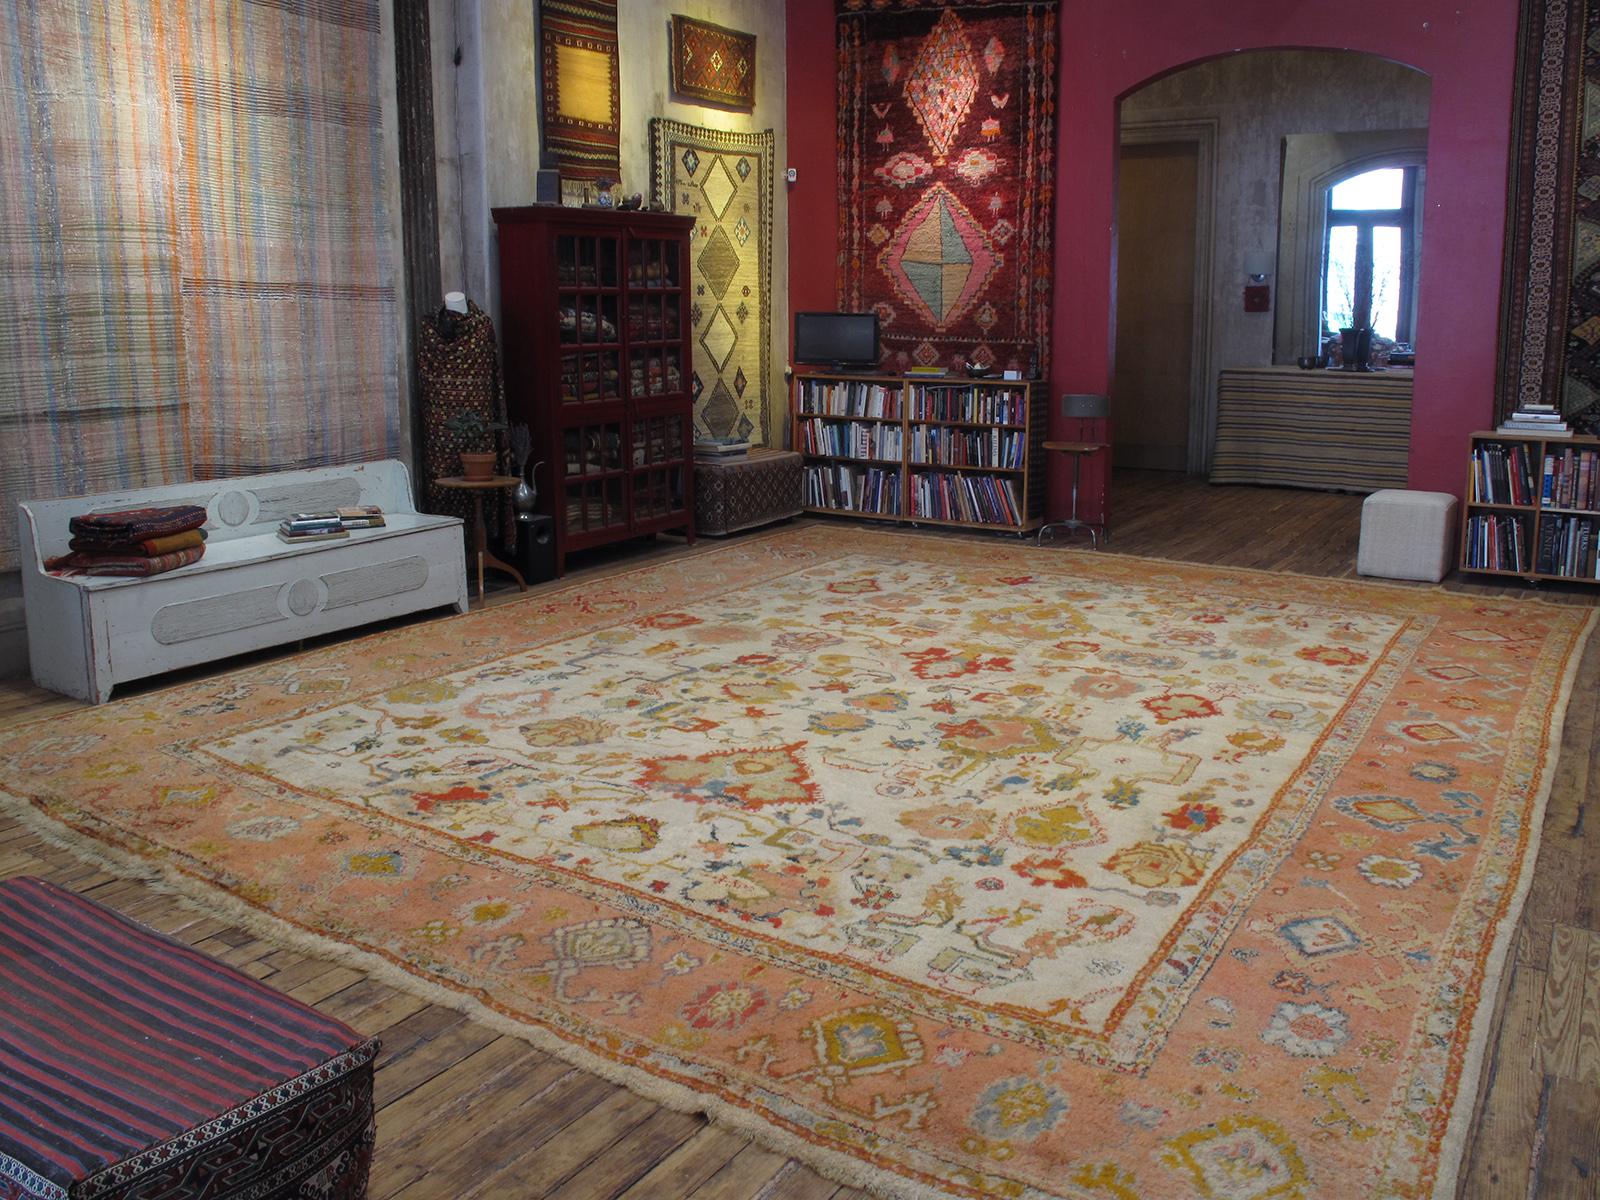 A fantastic, oversize antique Oushak carpet. The real deal, the genuine article, the kind that built the legend of Oushak.

The best examples, like this one, display a lighthearted, playful, almost impressionistic take on classical Persian designs: